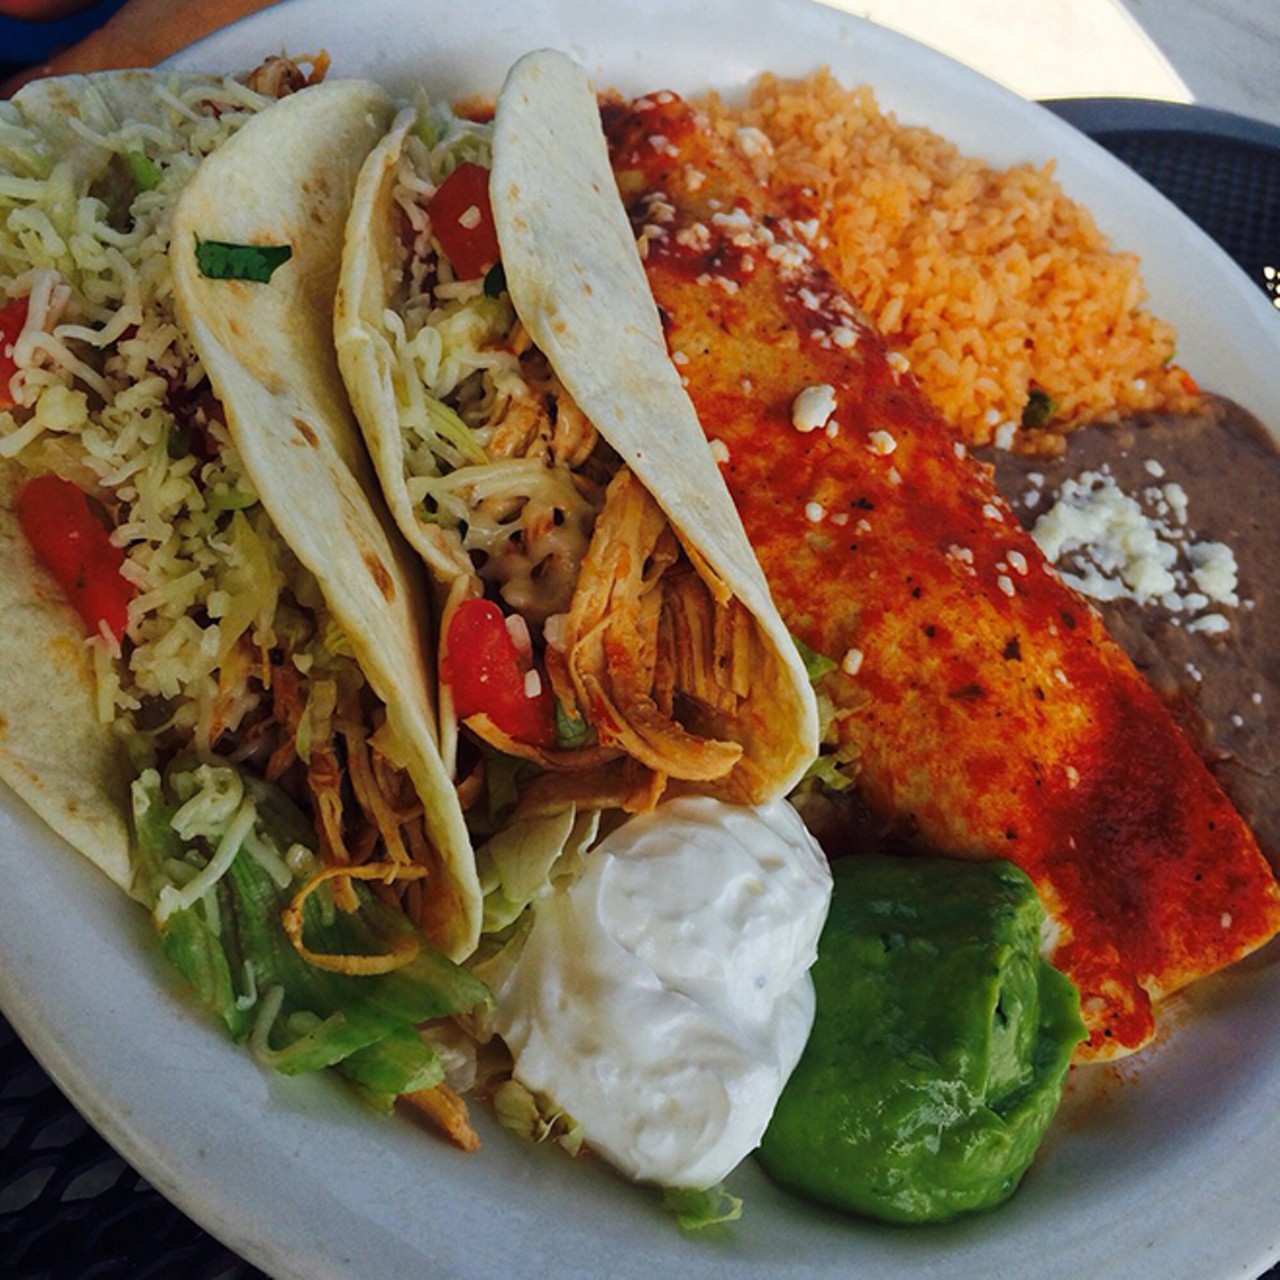 Colibri Mexican Cuisine
4963 New Broad St., 407-629-6601
Not just tacos: gourmet tacos. 
Photo via Yelp